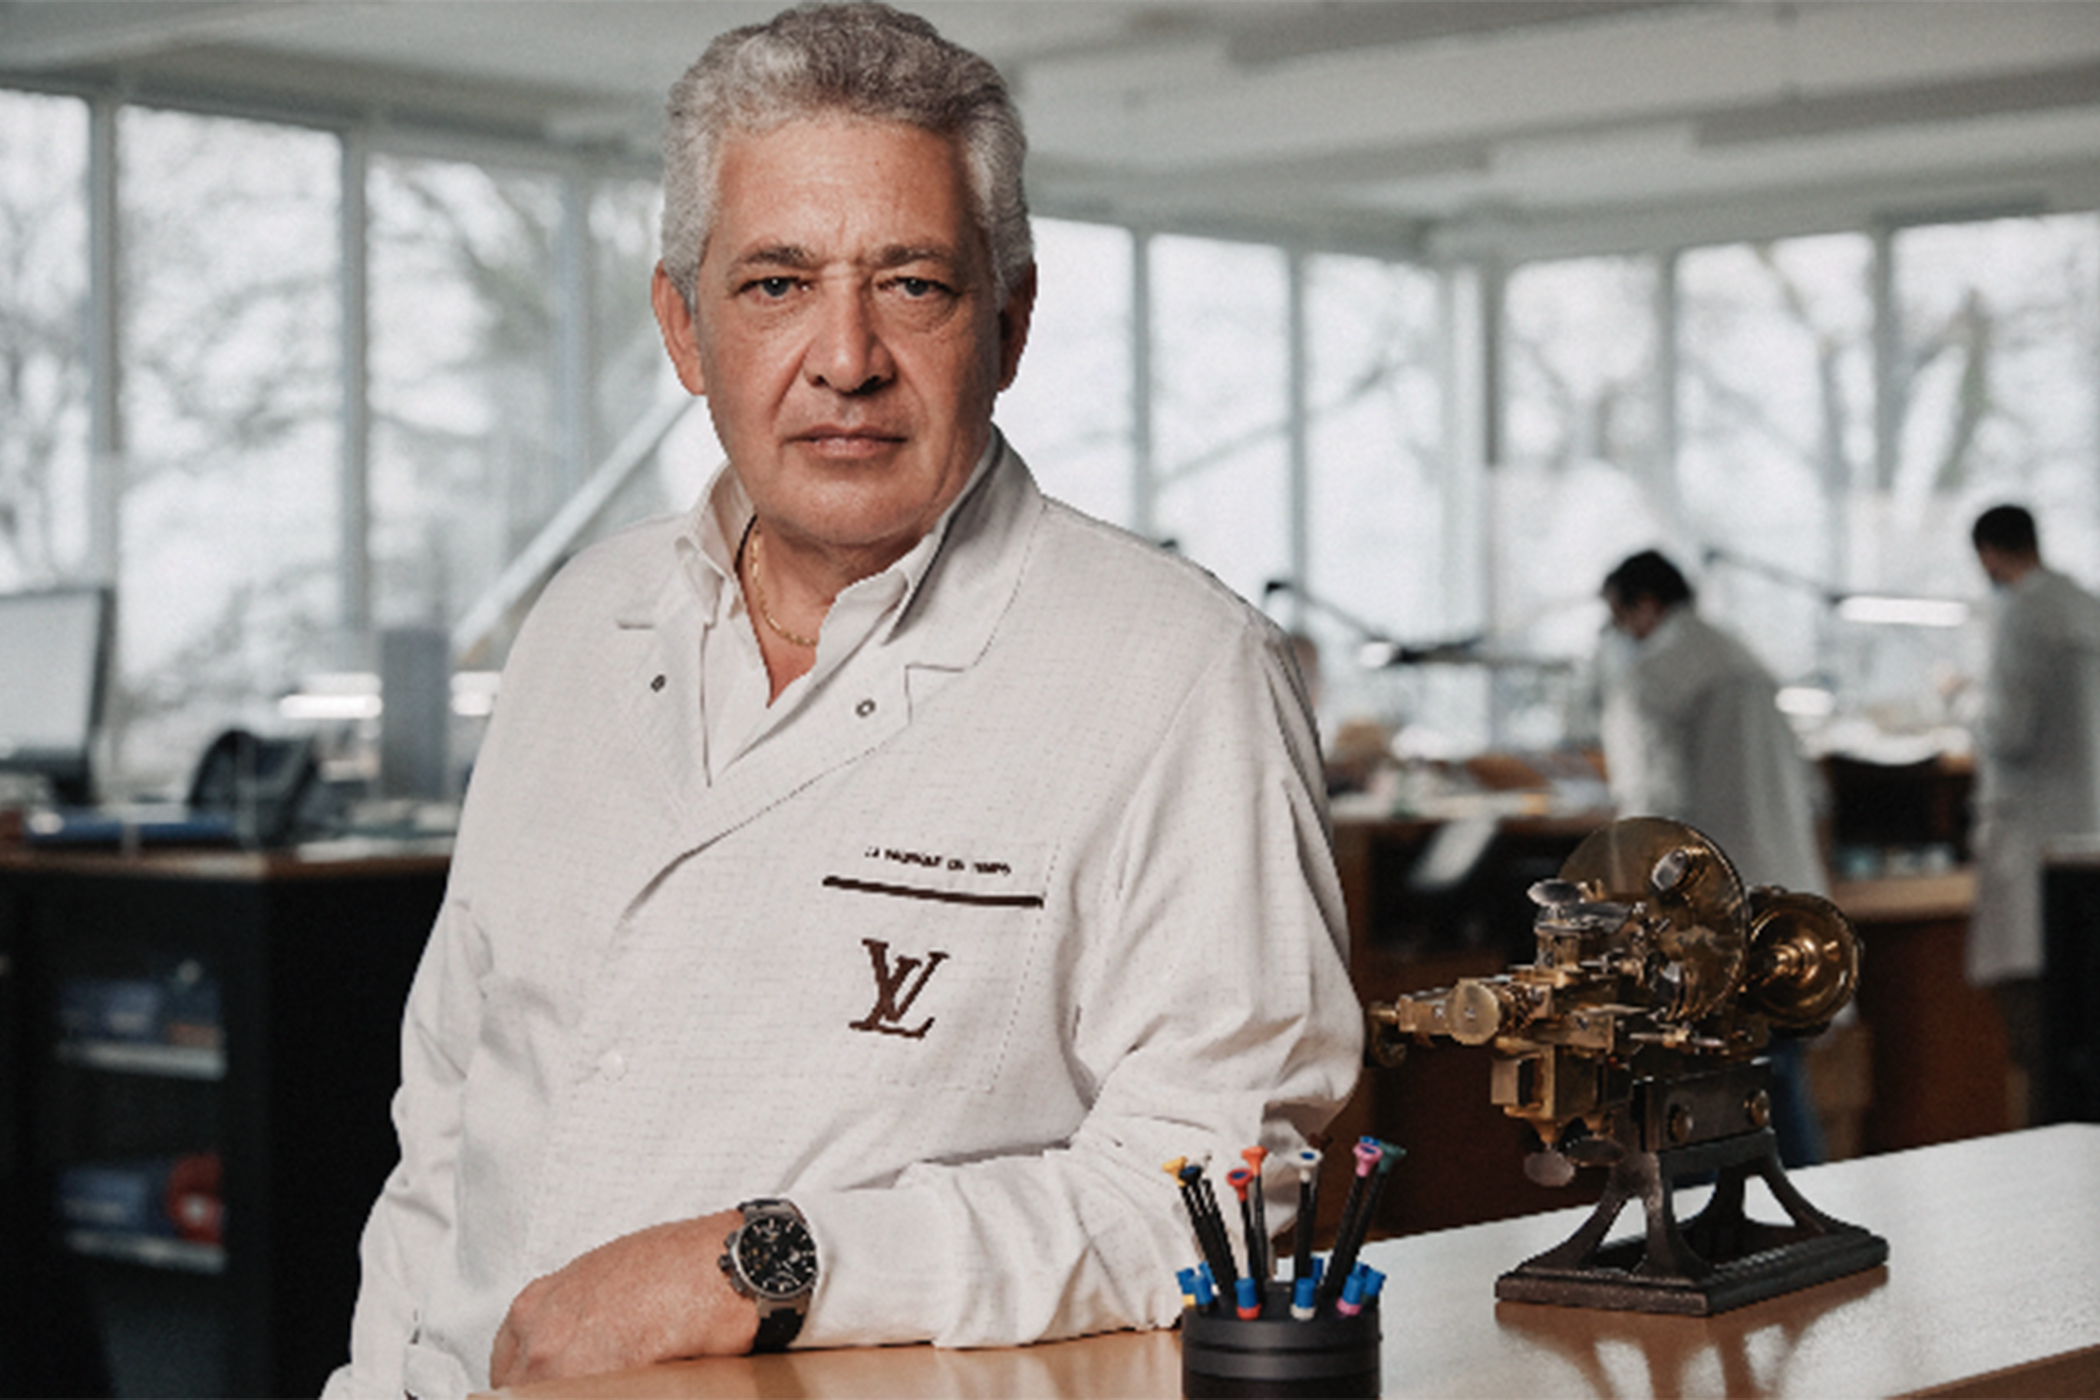 Stéphane Bianchi, President of the LVMH Watches & Jewelry Division